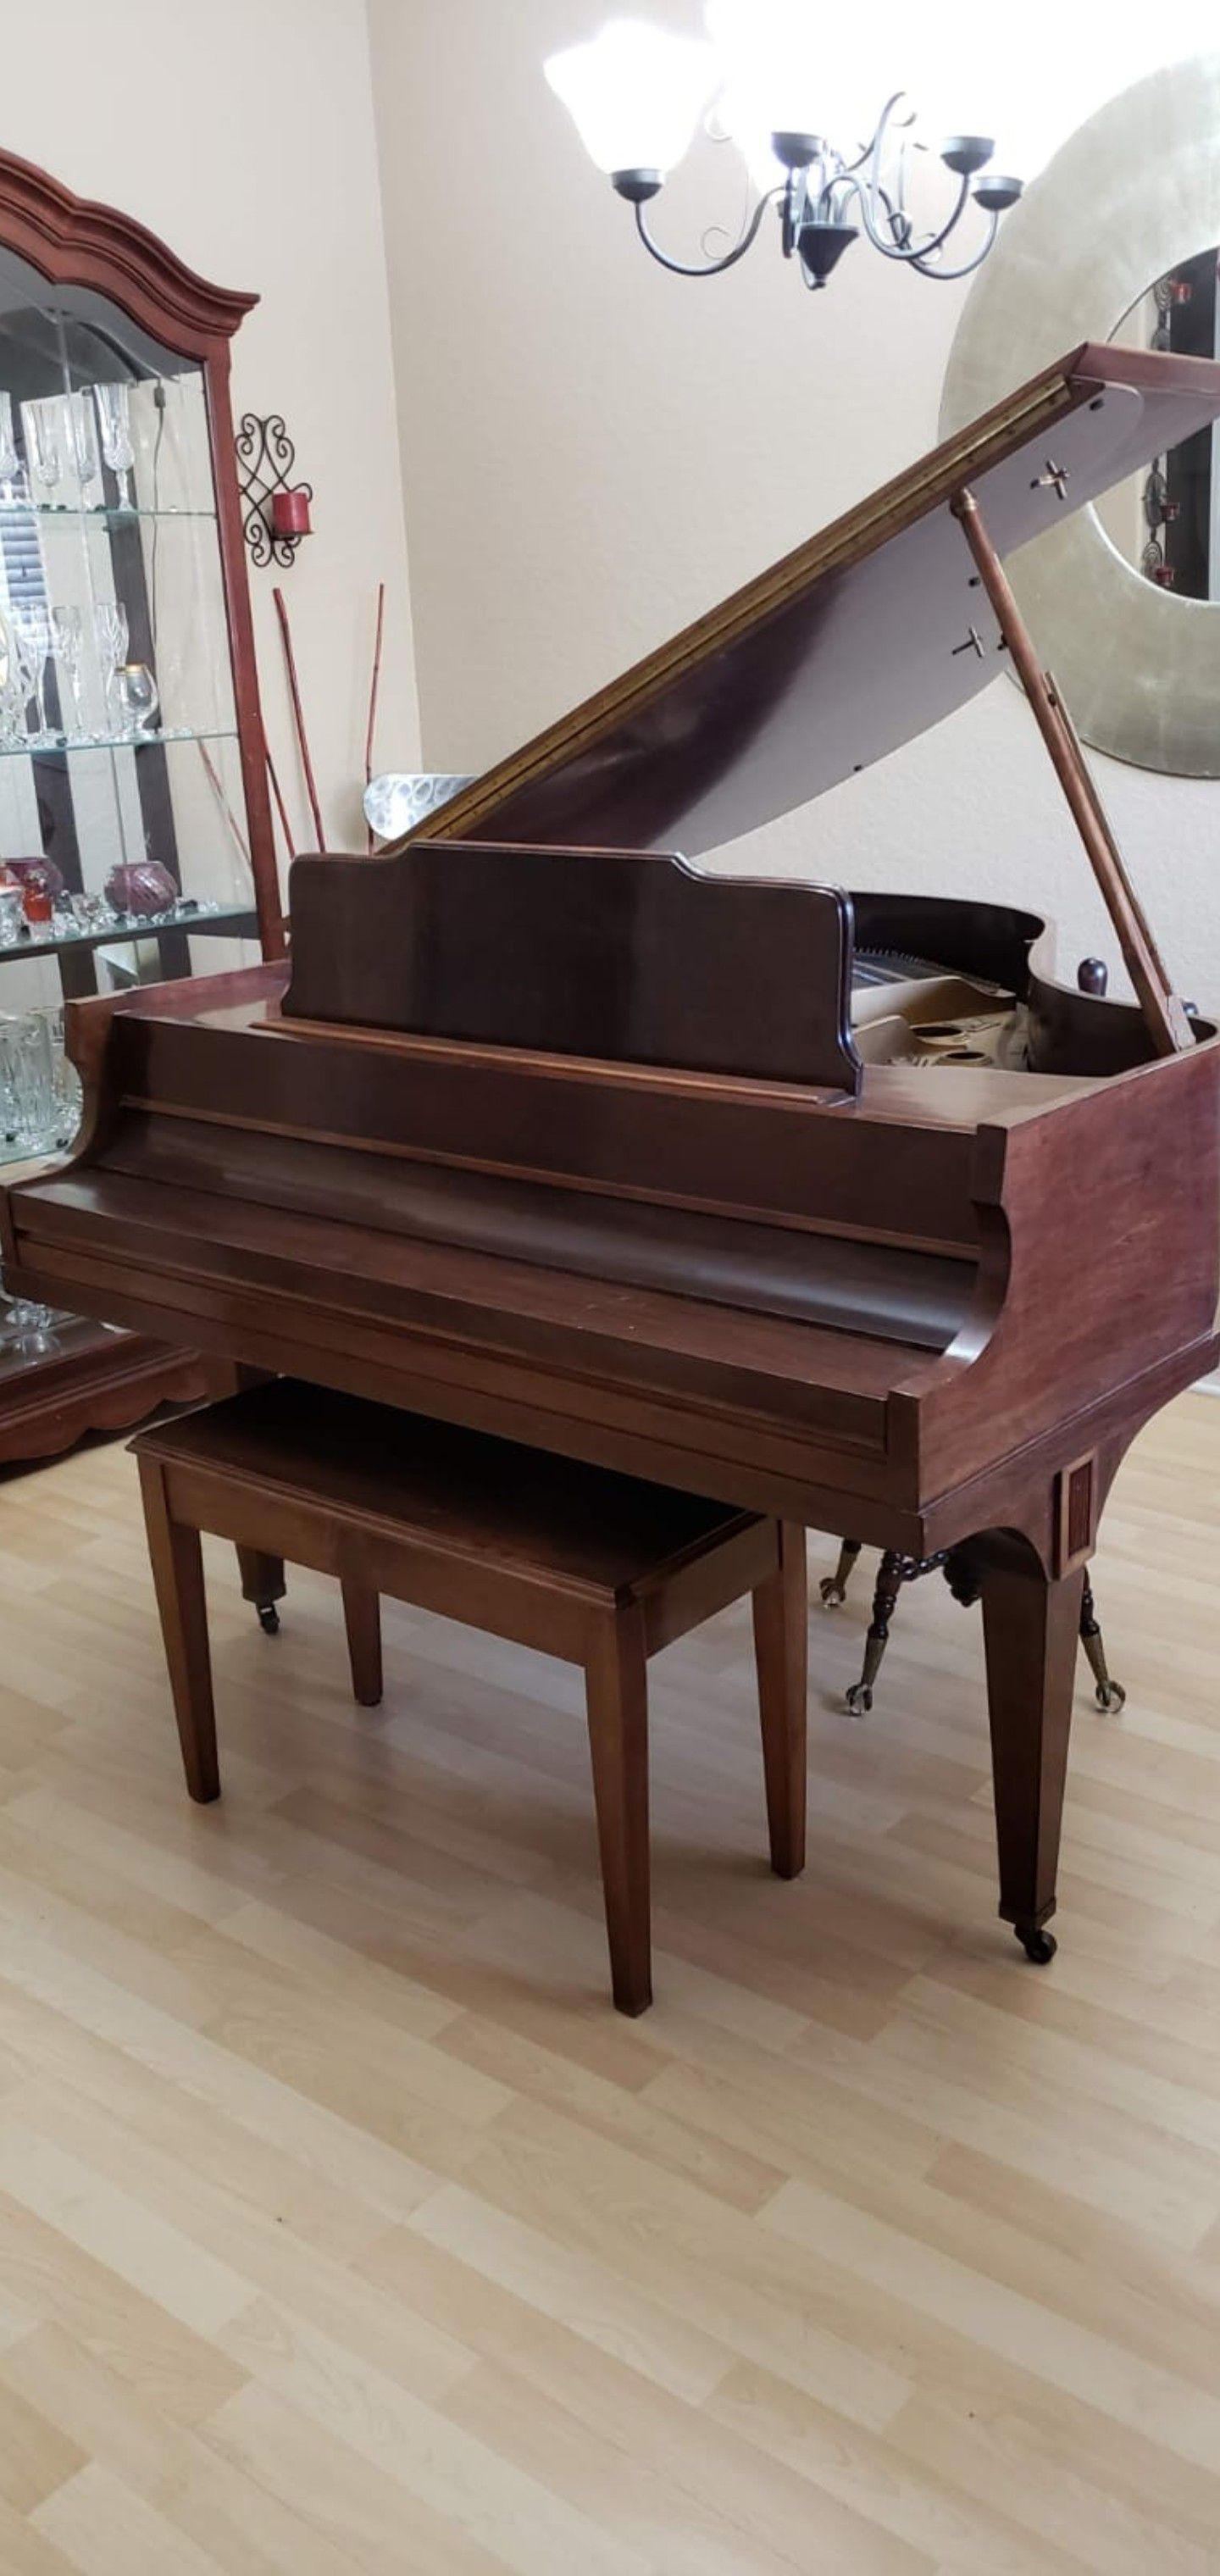 Antique Baby Grand Piano from the 1900s & 2 Types of Chairs l have the paper work for this piano..